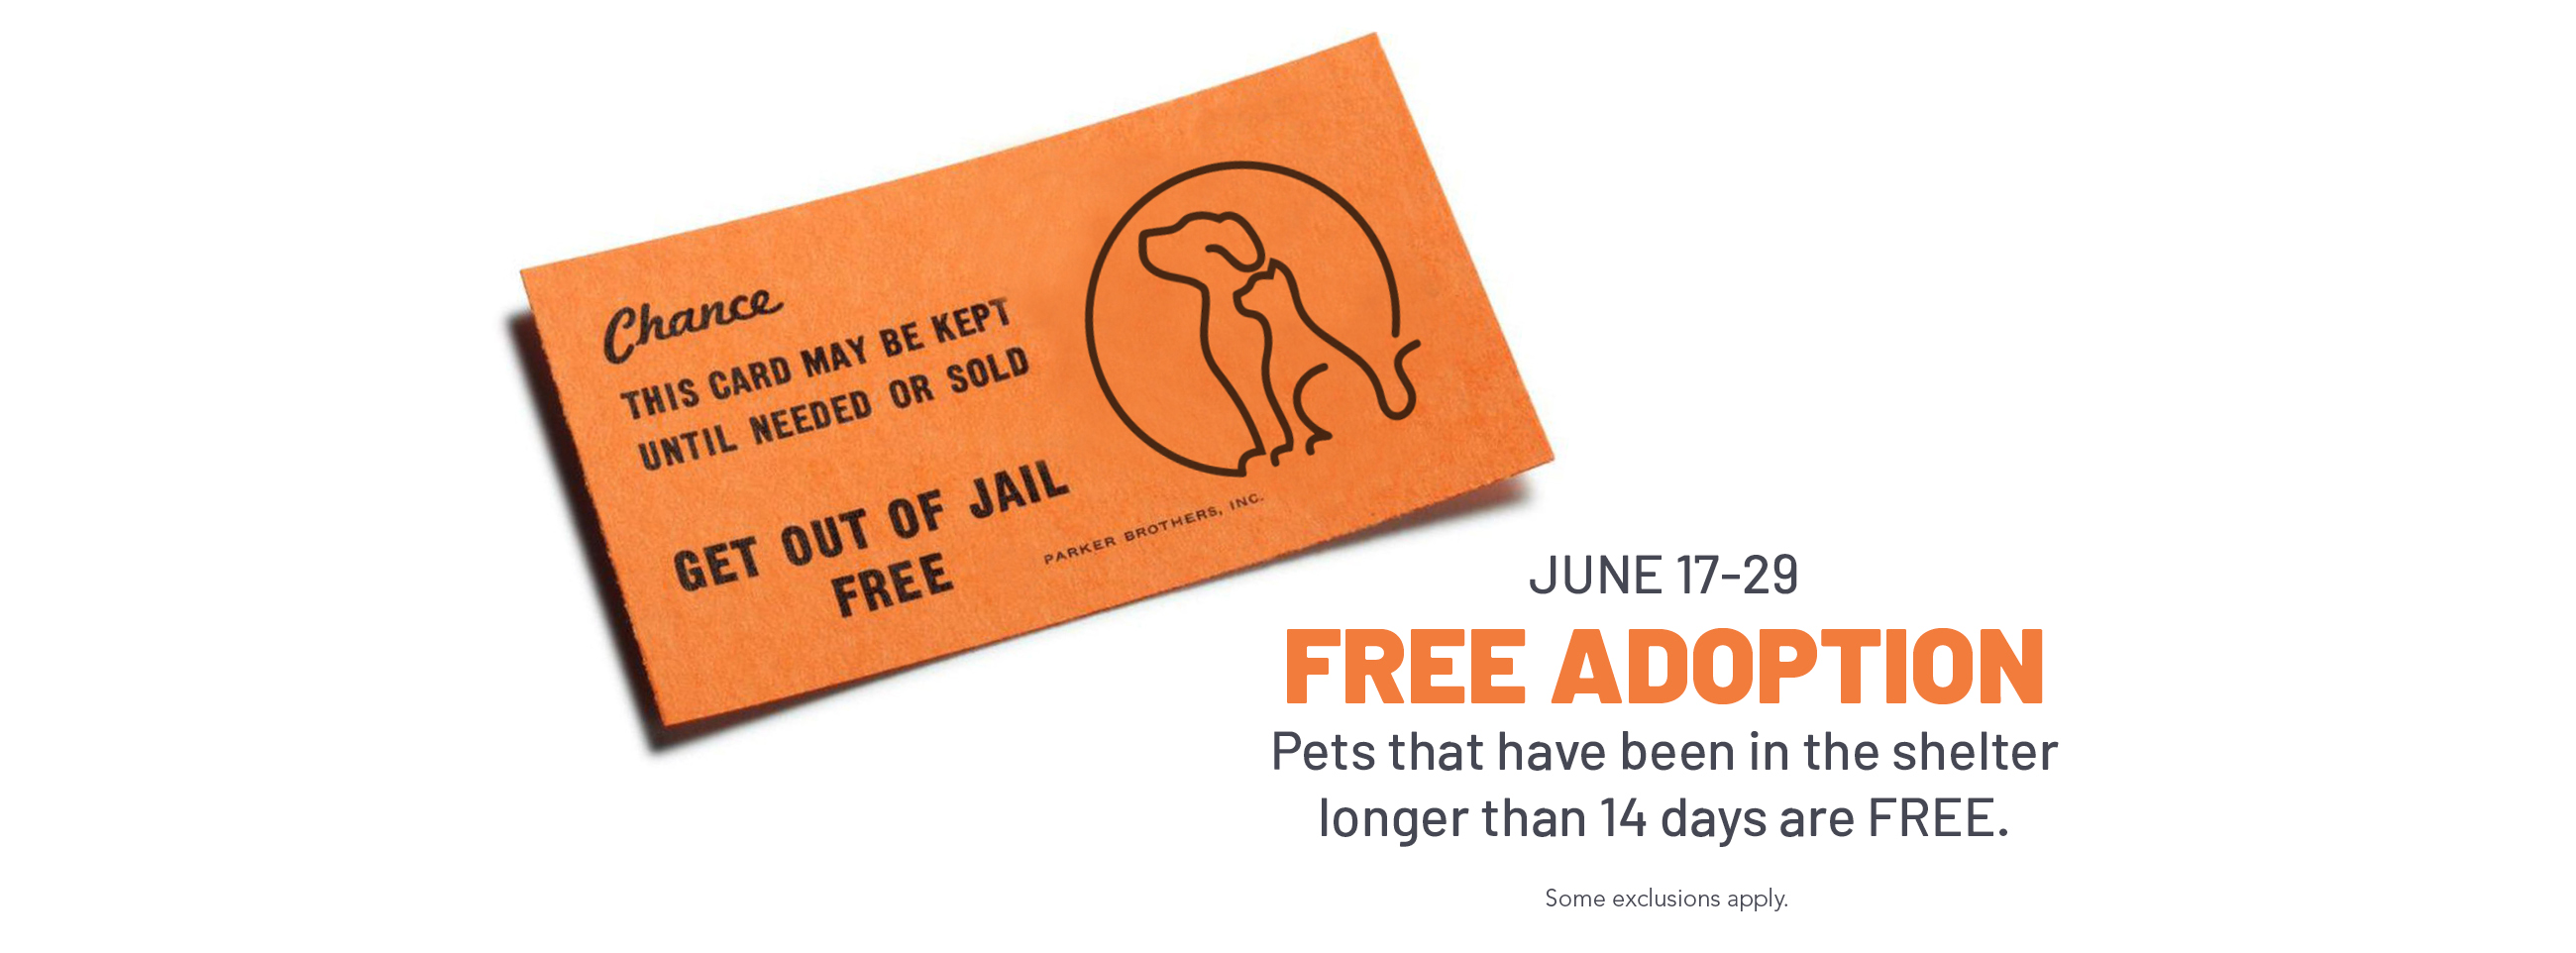 image of a "Get Out of Jail Free" card from a Monopoly game but designed to be a Petnopoly game